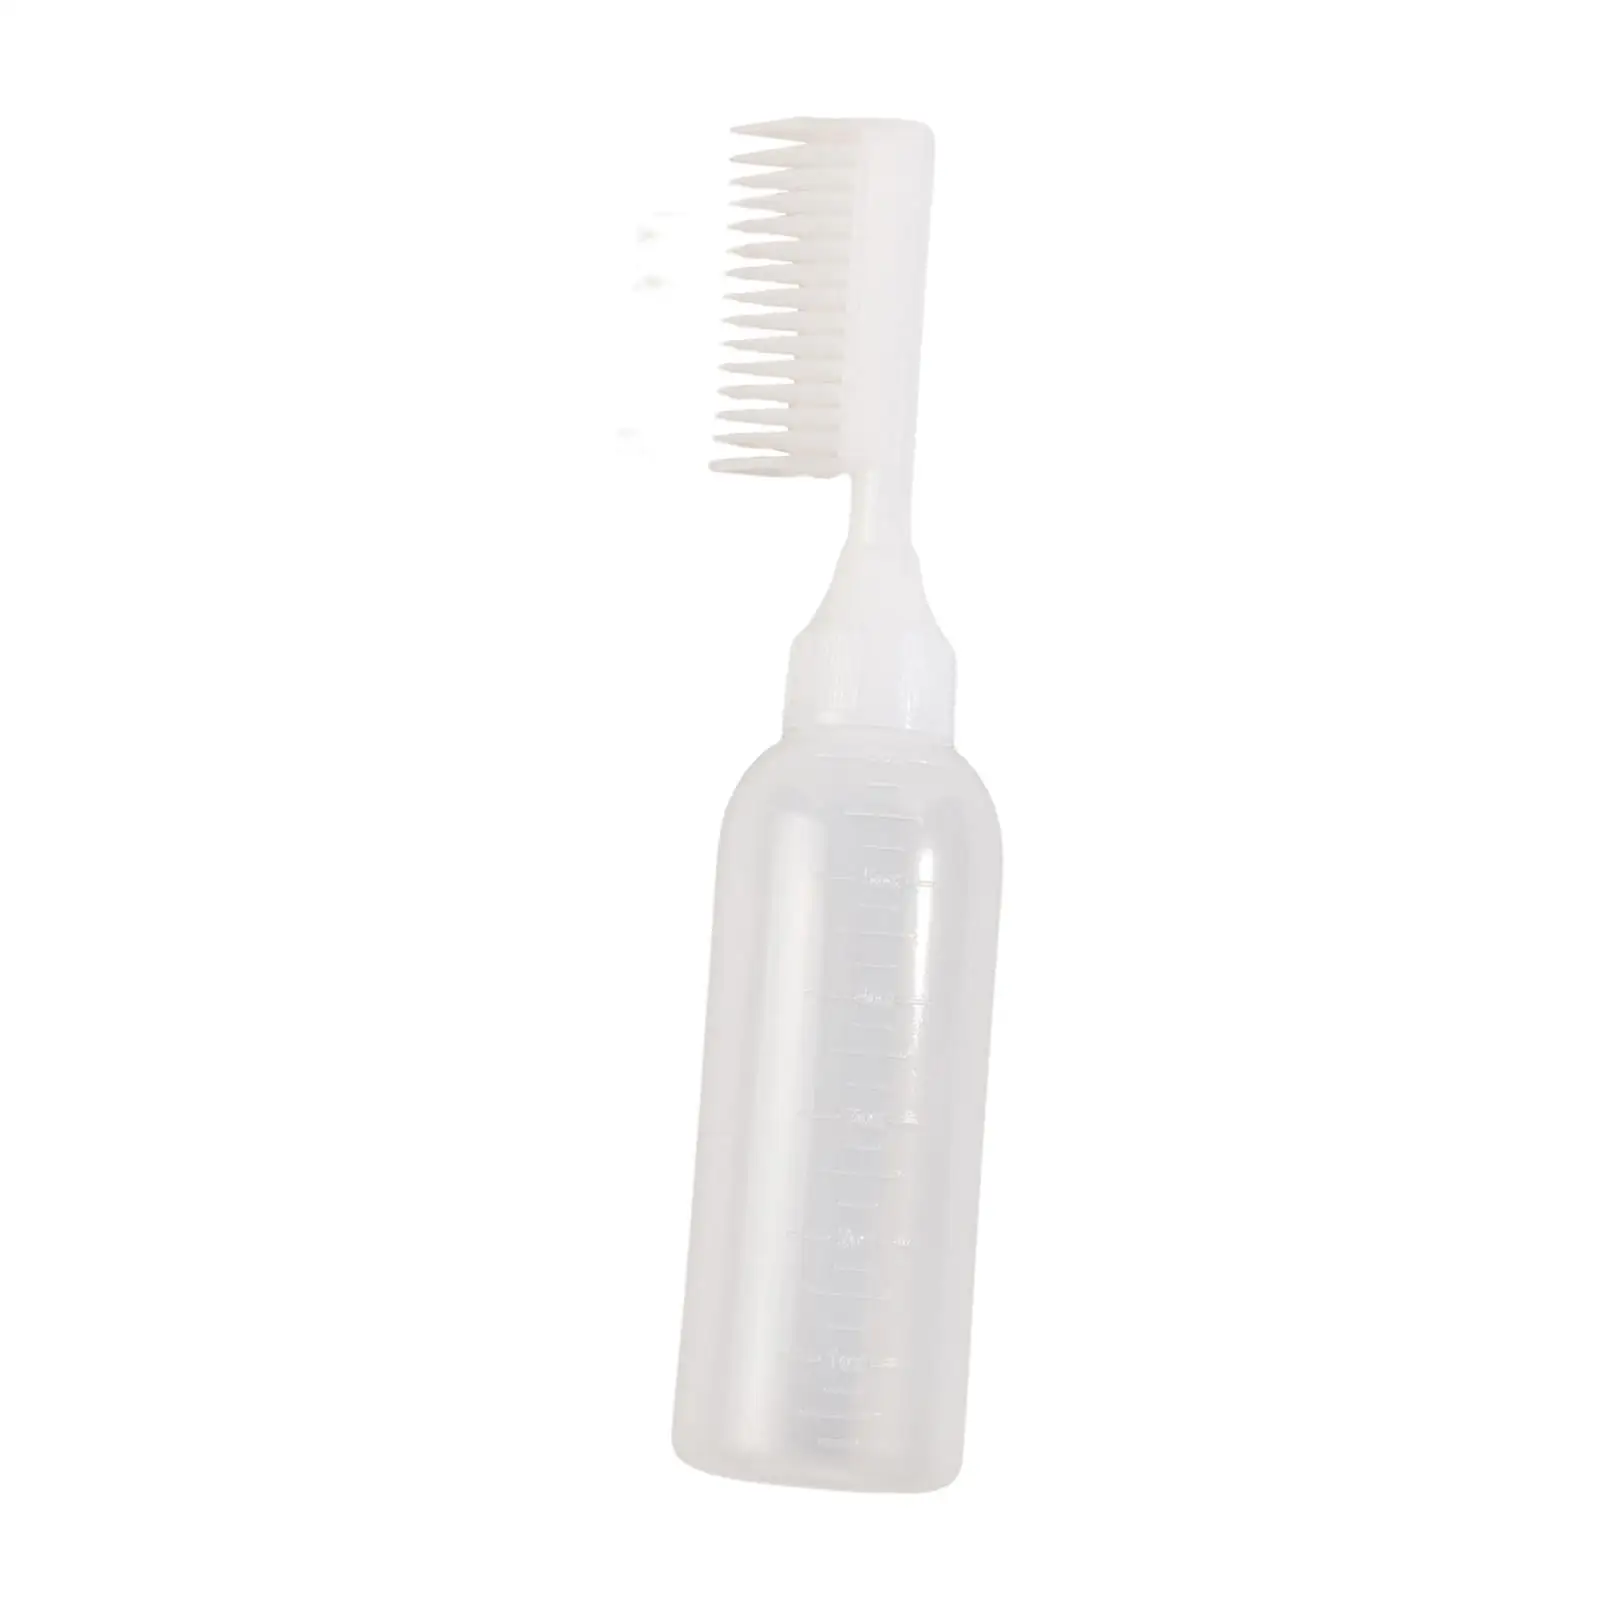 

Root Comb Applicator Bottle Refillable Hair Coloring Dyeing Dispensing Container Hair Dye Applicator Brush for Salon Shop